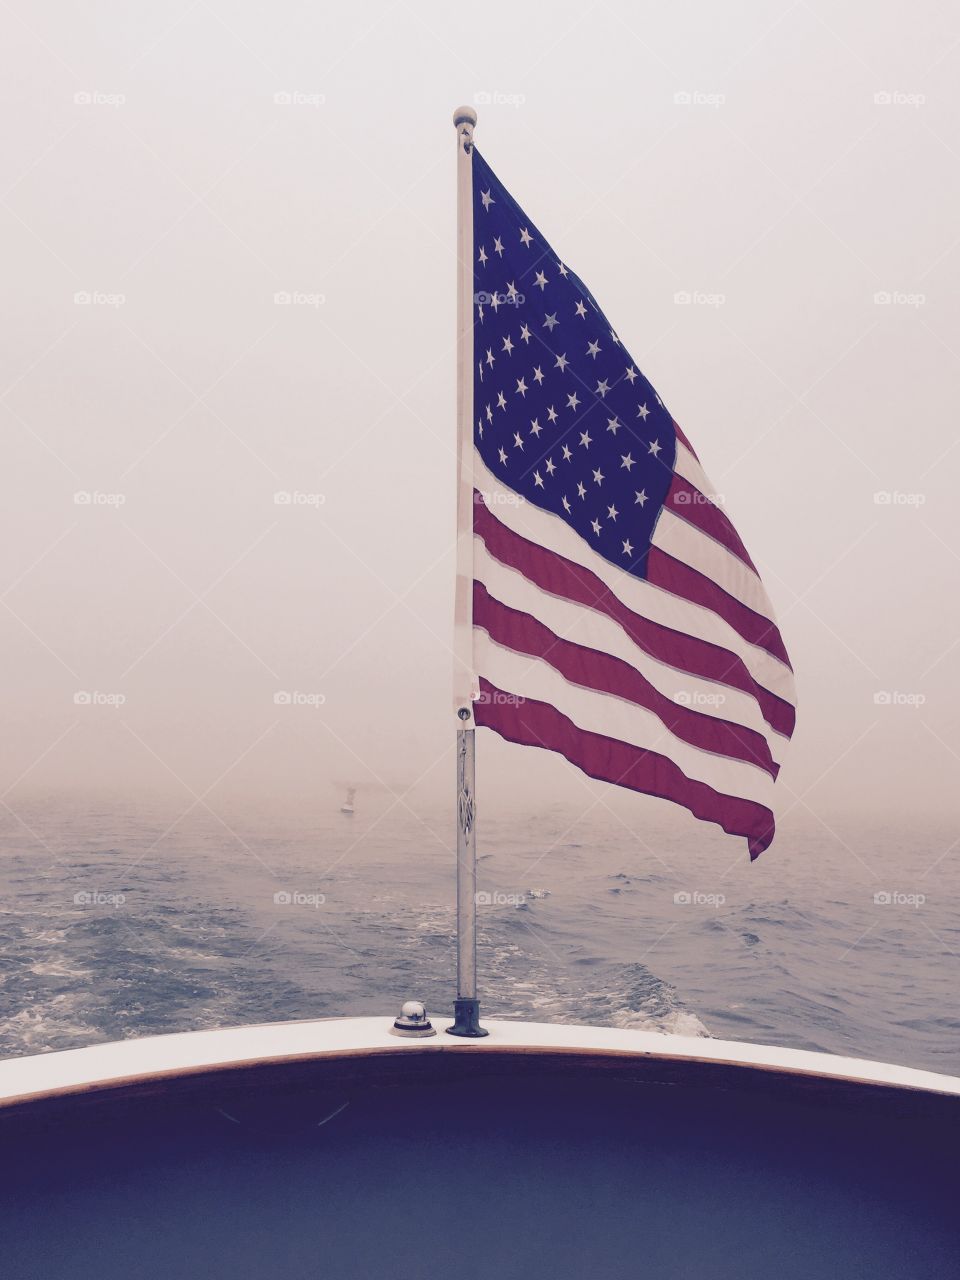 Foggy Day on the Water